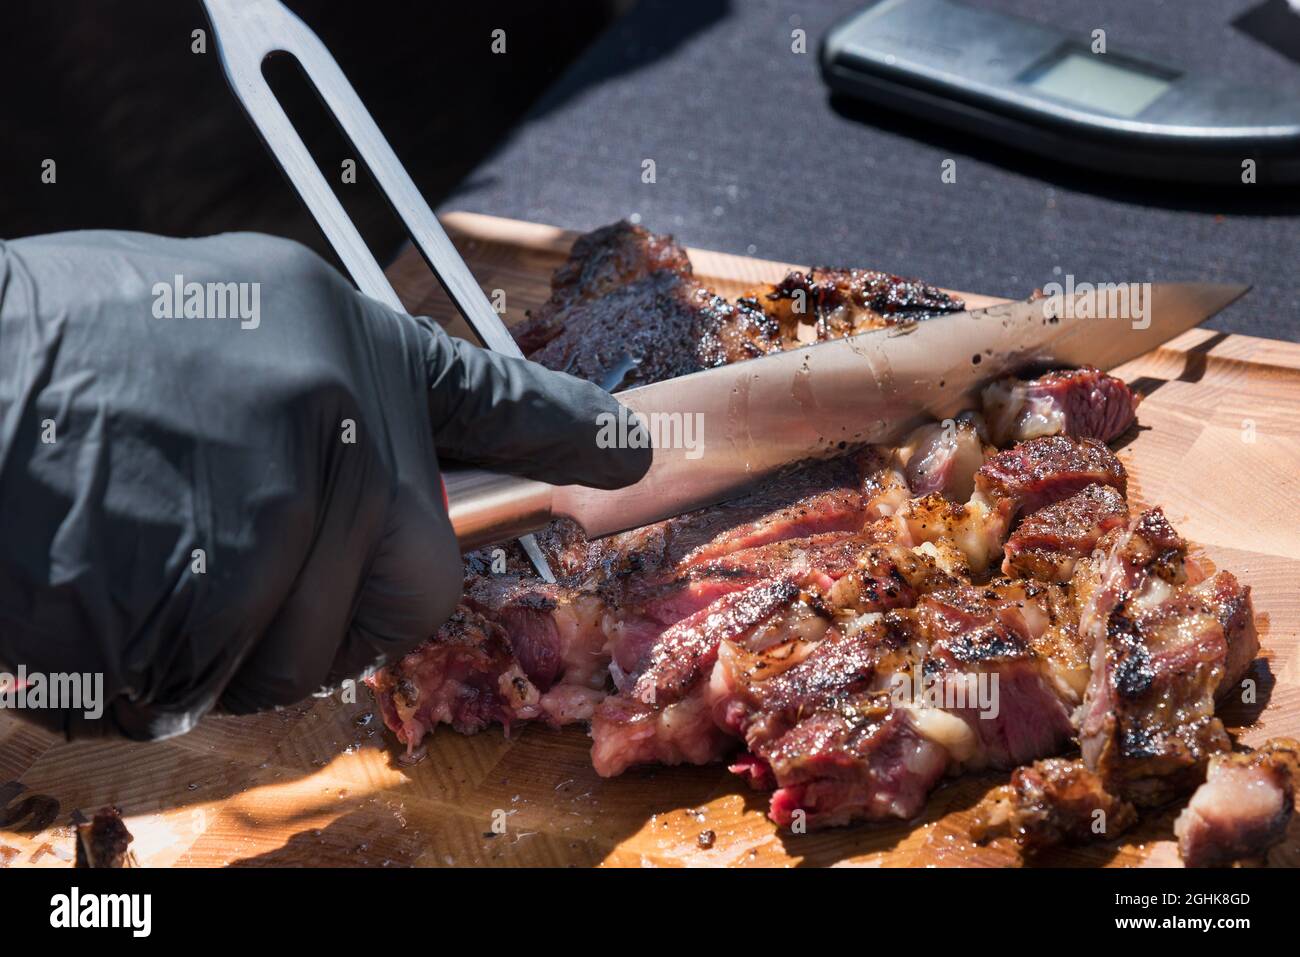 https://c8.alamy.com/comp/2GHK8GD/gloved-hand-of-a-chef-carving-a-portion-of-grilled-prime-rib-eye-meat-from-the-bbq-on-a-wooden-chopping-board-in-a-close-up-on-the-food-2GHK8GD.jpg